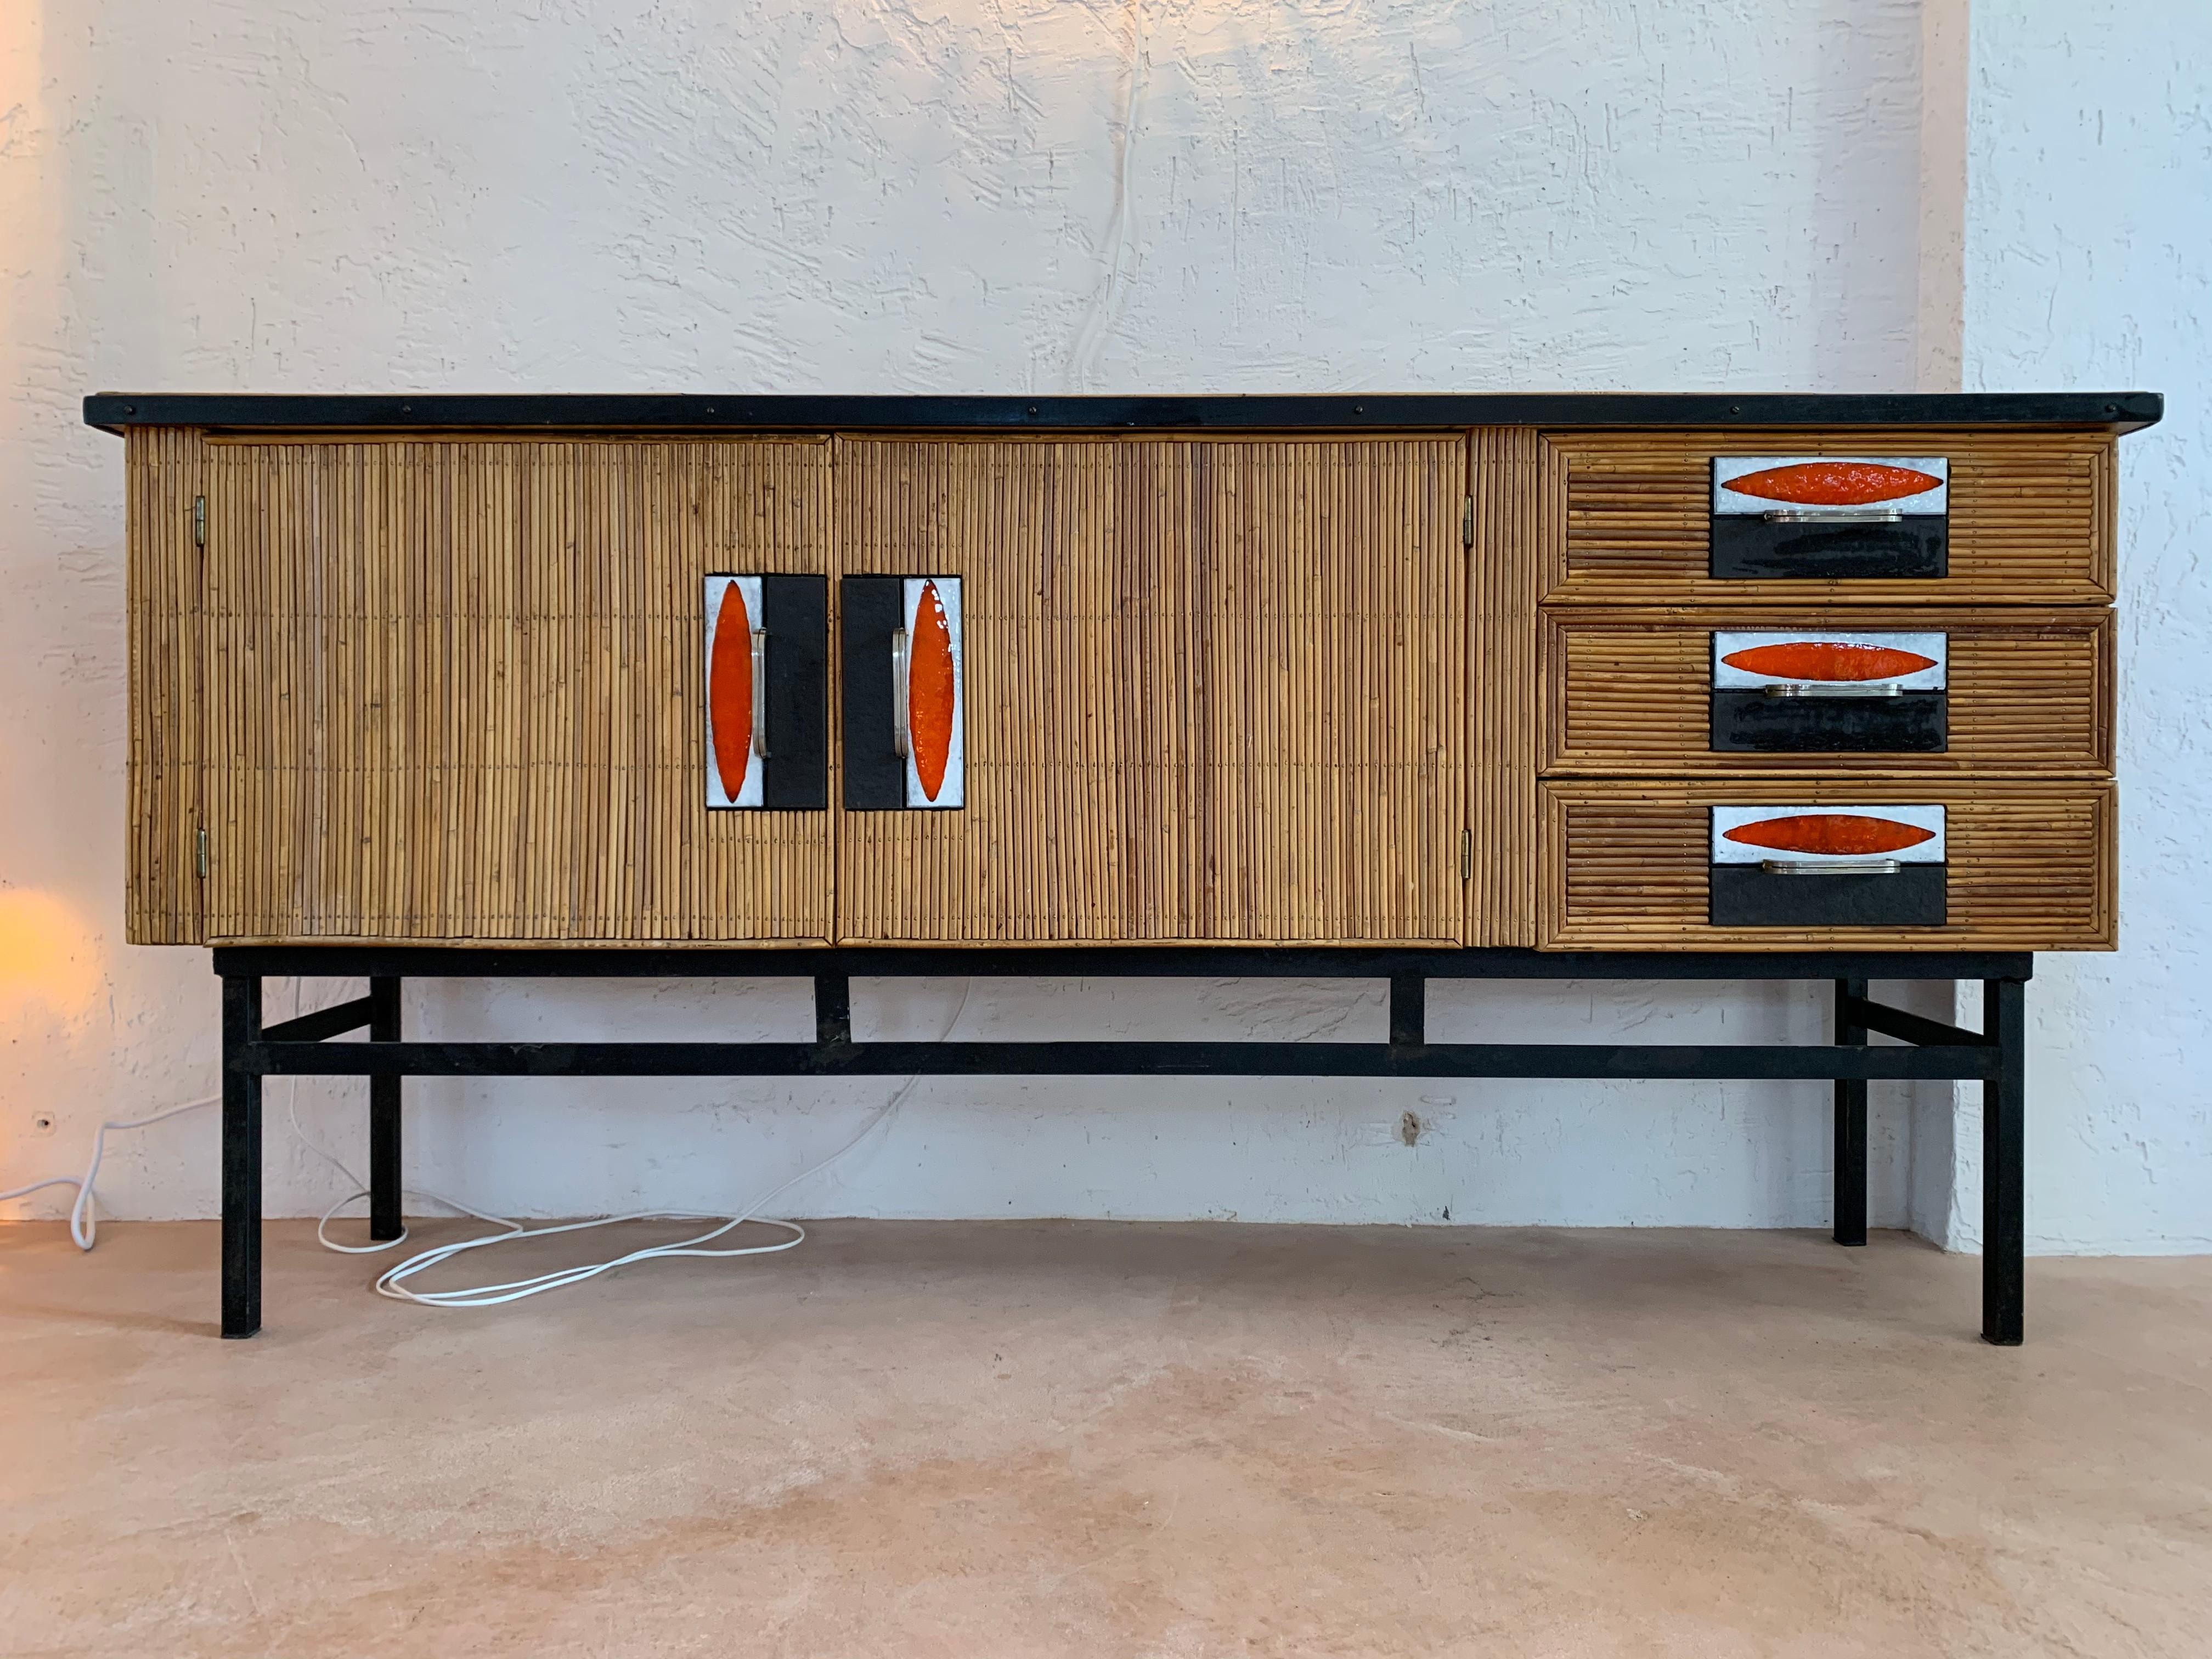 Audoux & Minet with Roger Capron Ceramic Tiles Sideboard in Rattan & metal, 1950 4